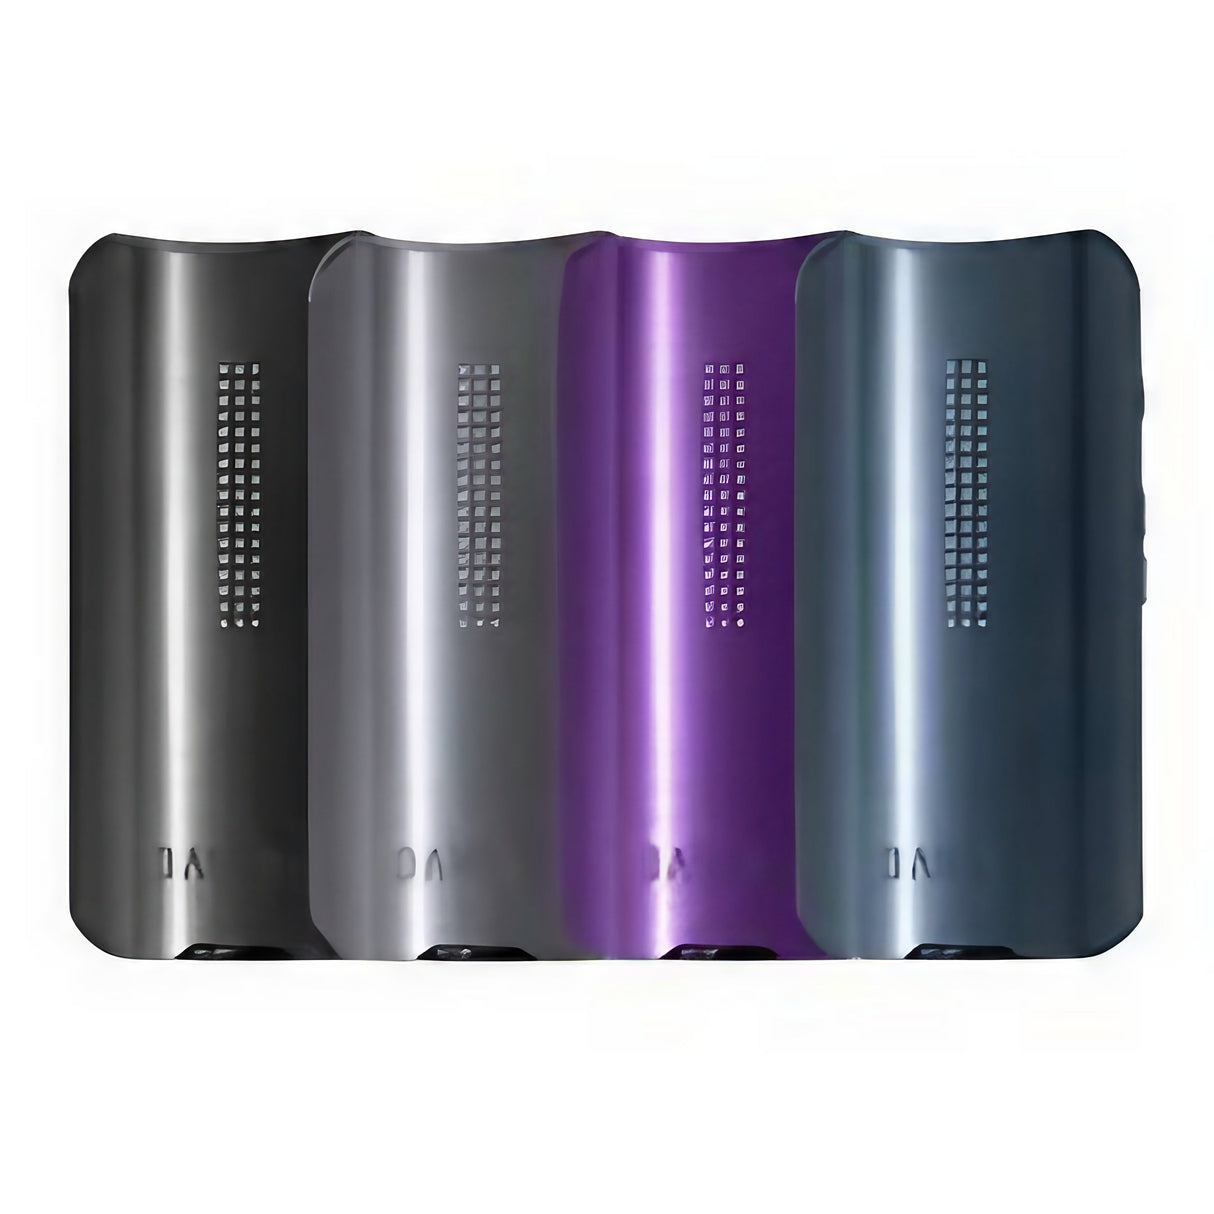 DaVinci IQ2 Vaporizers in three colors, compact and portable design with LED grids, front view